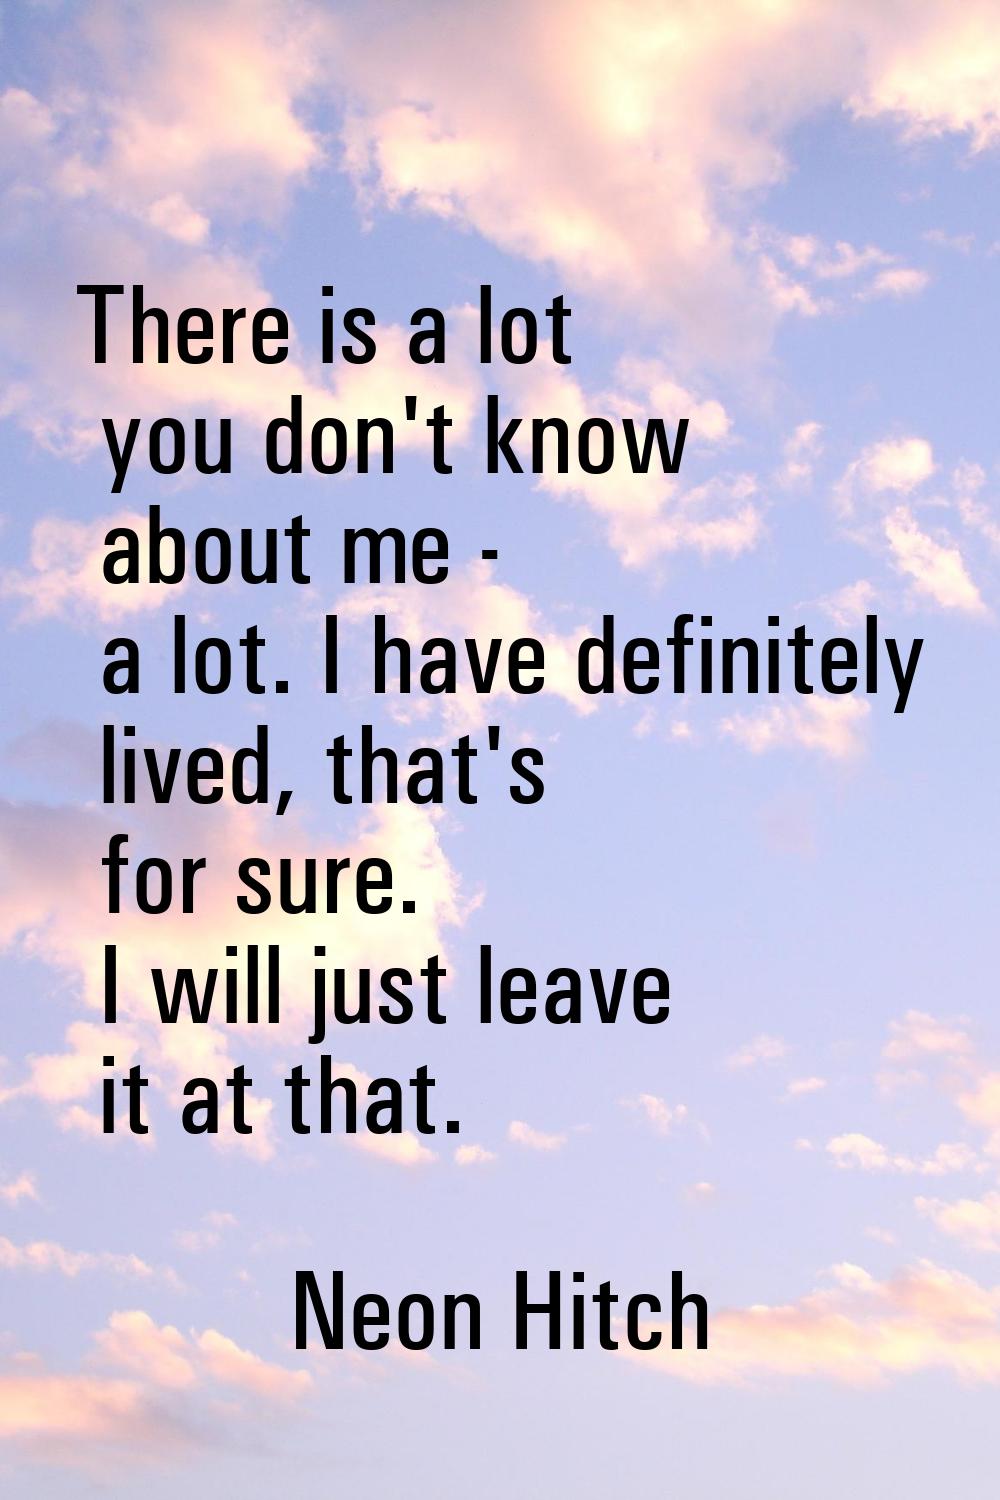 There is a lot you don't know about me - a lot. I have definitely lived, that's for sure. I will ju